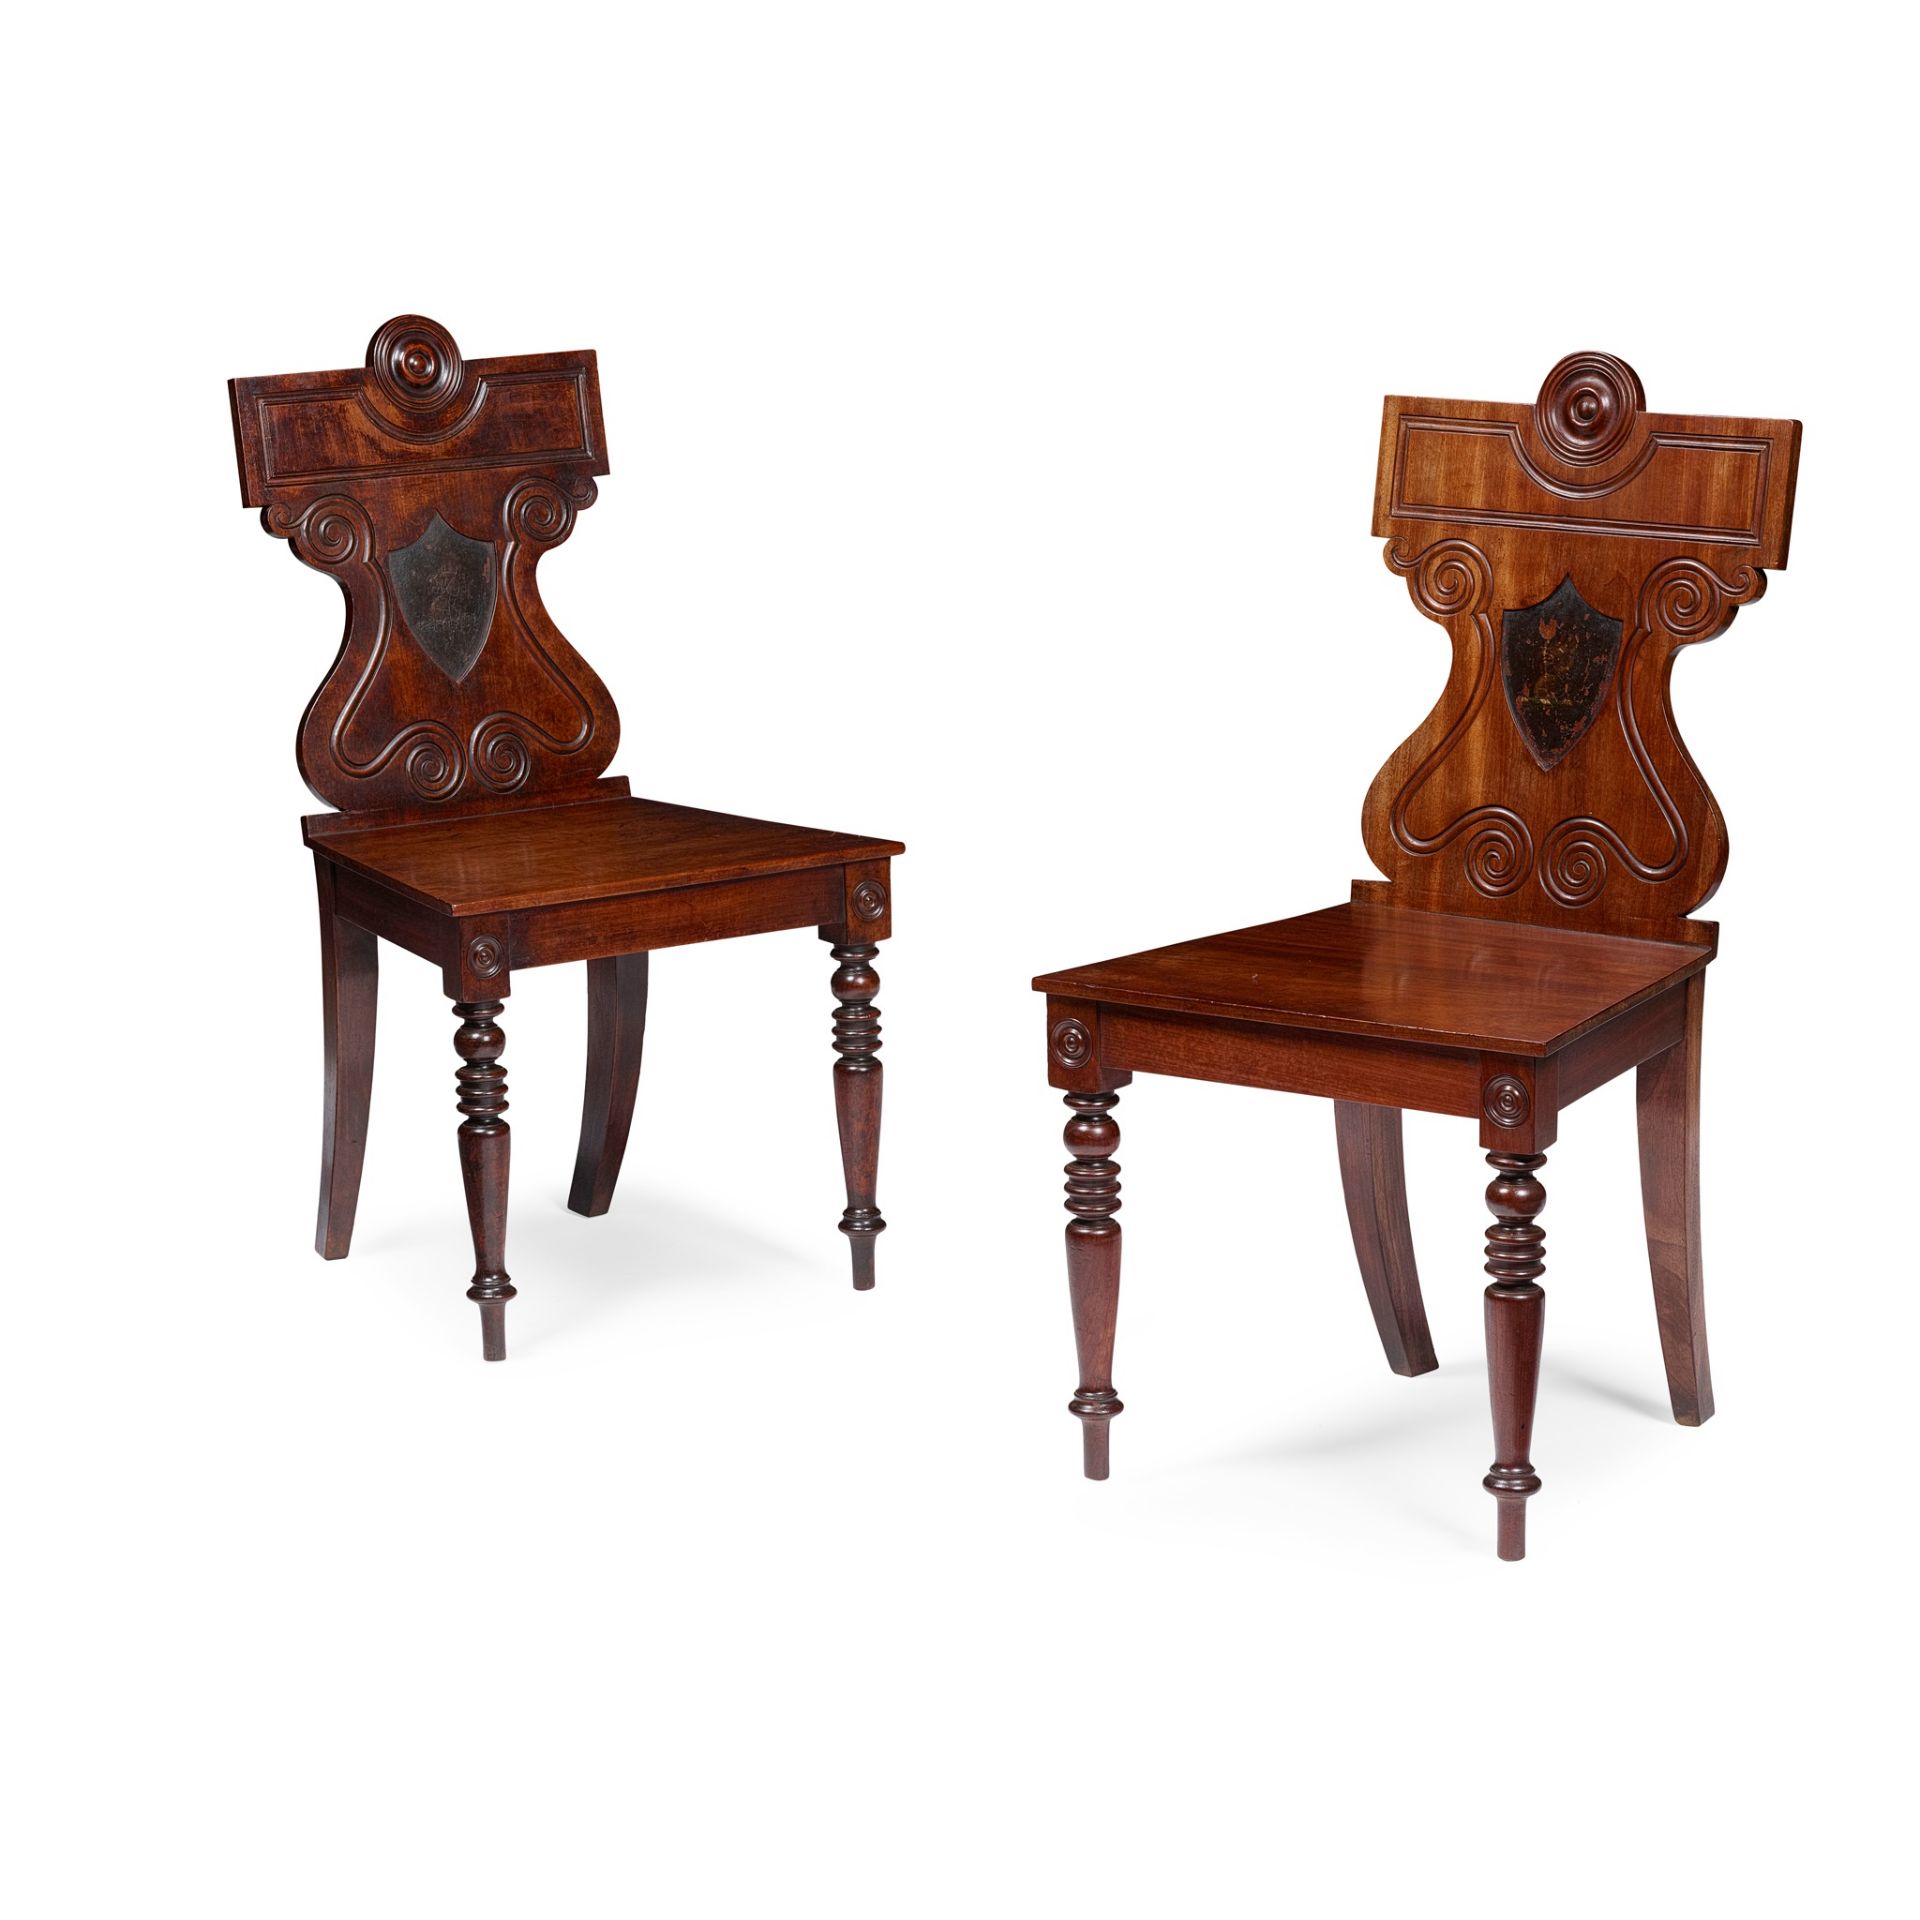 PAIR OF GEORGE III MAHOGANY CRESTED HALL CHAIRS 18TH CENTURY